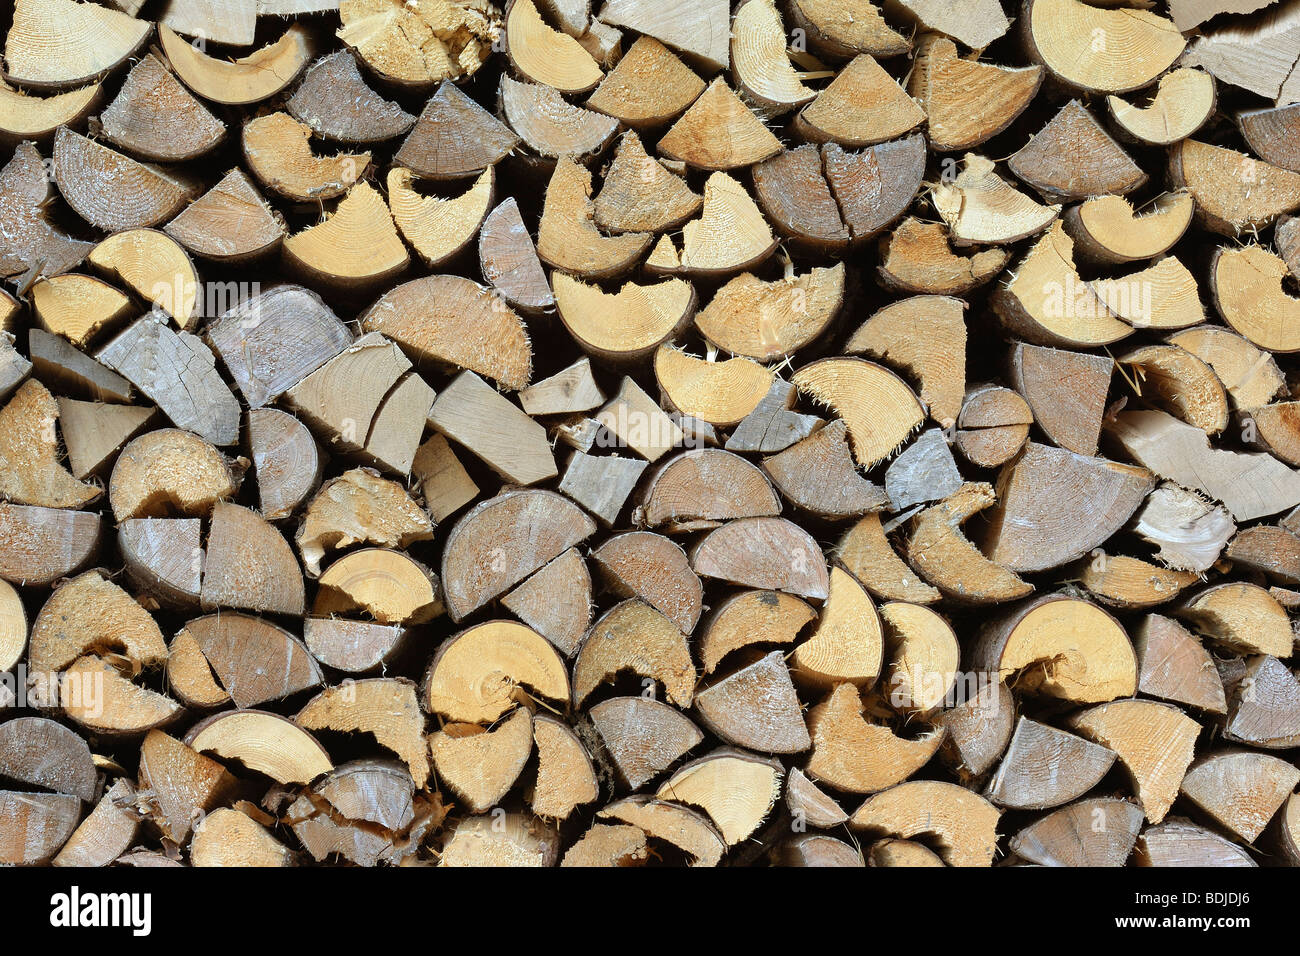 Close-up of Stacked Firewood Stock Photo